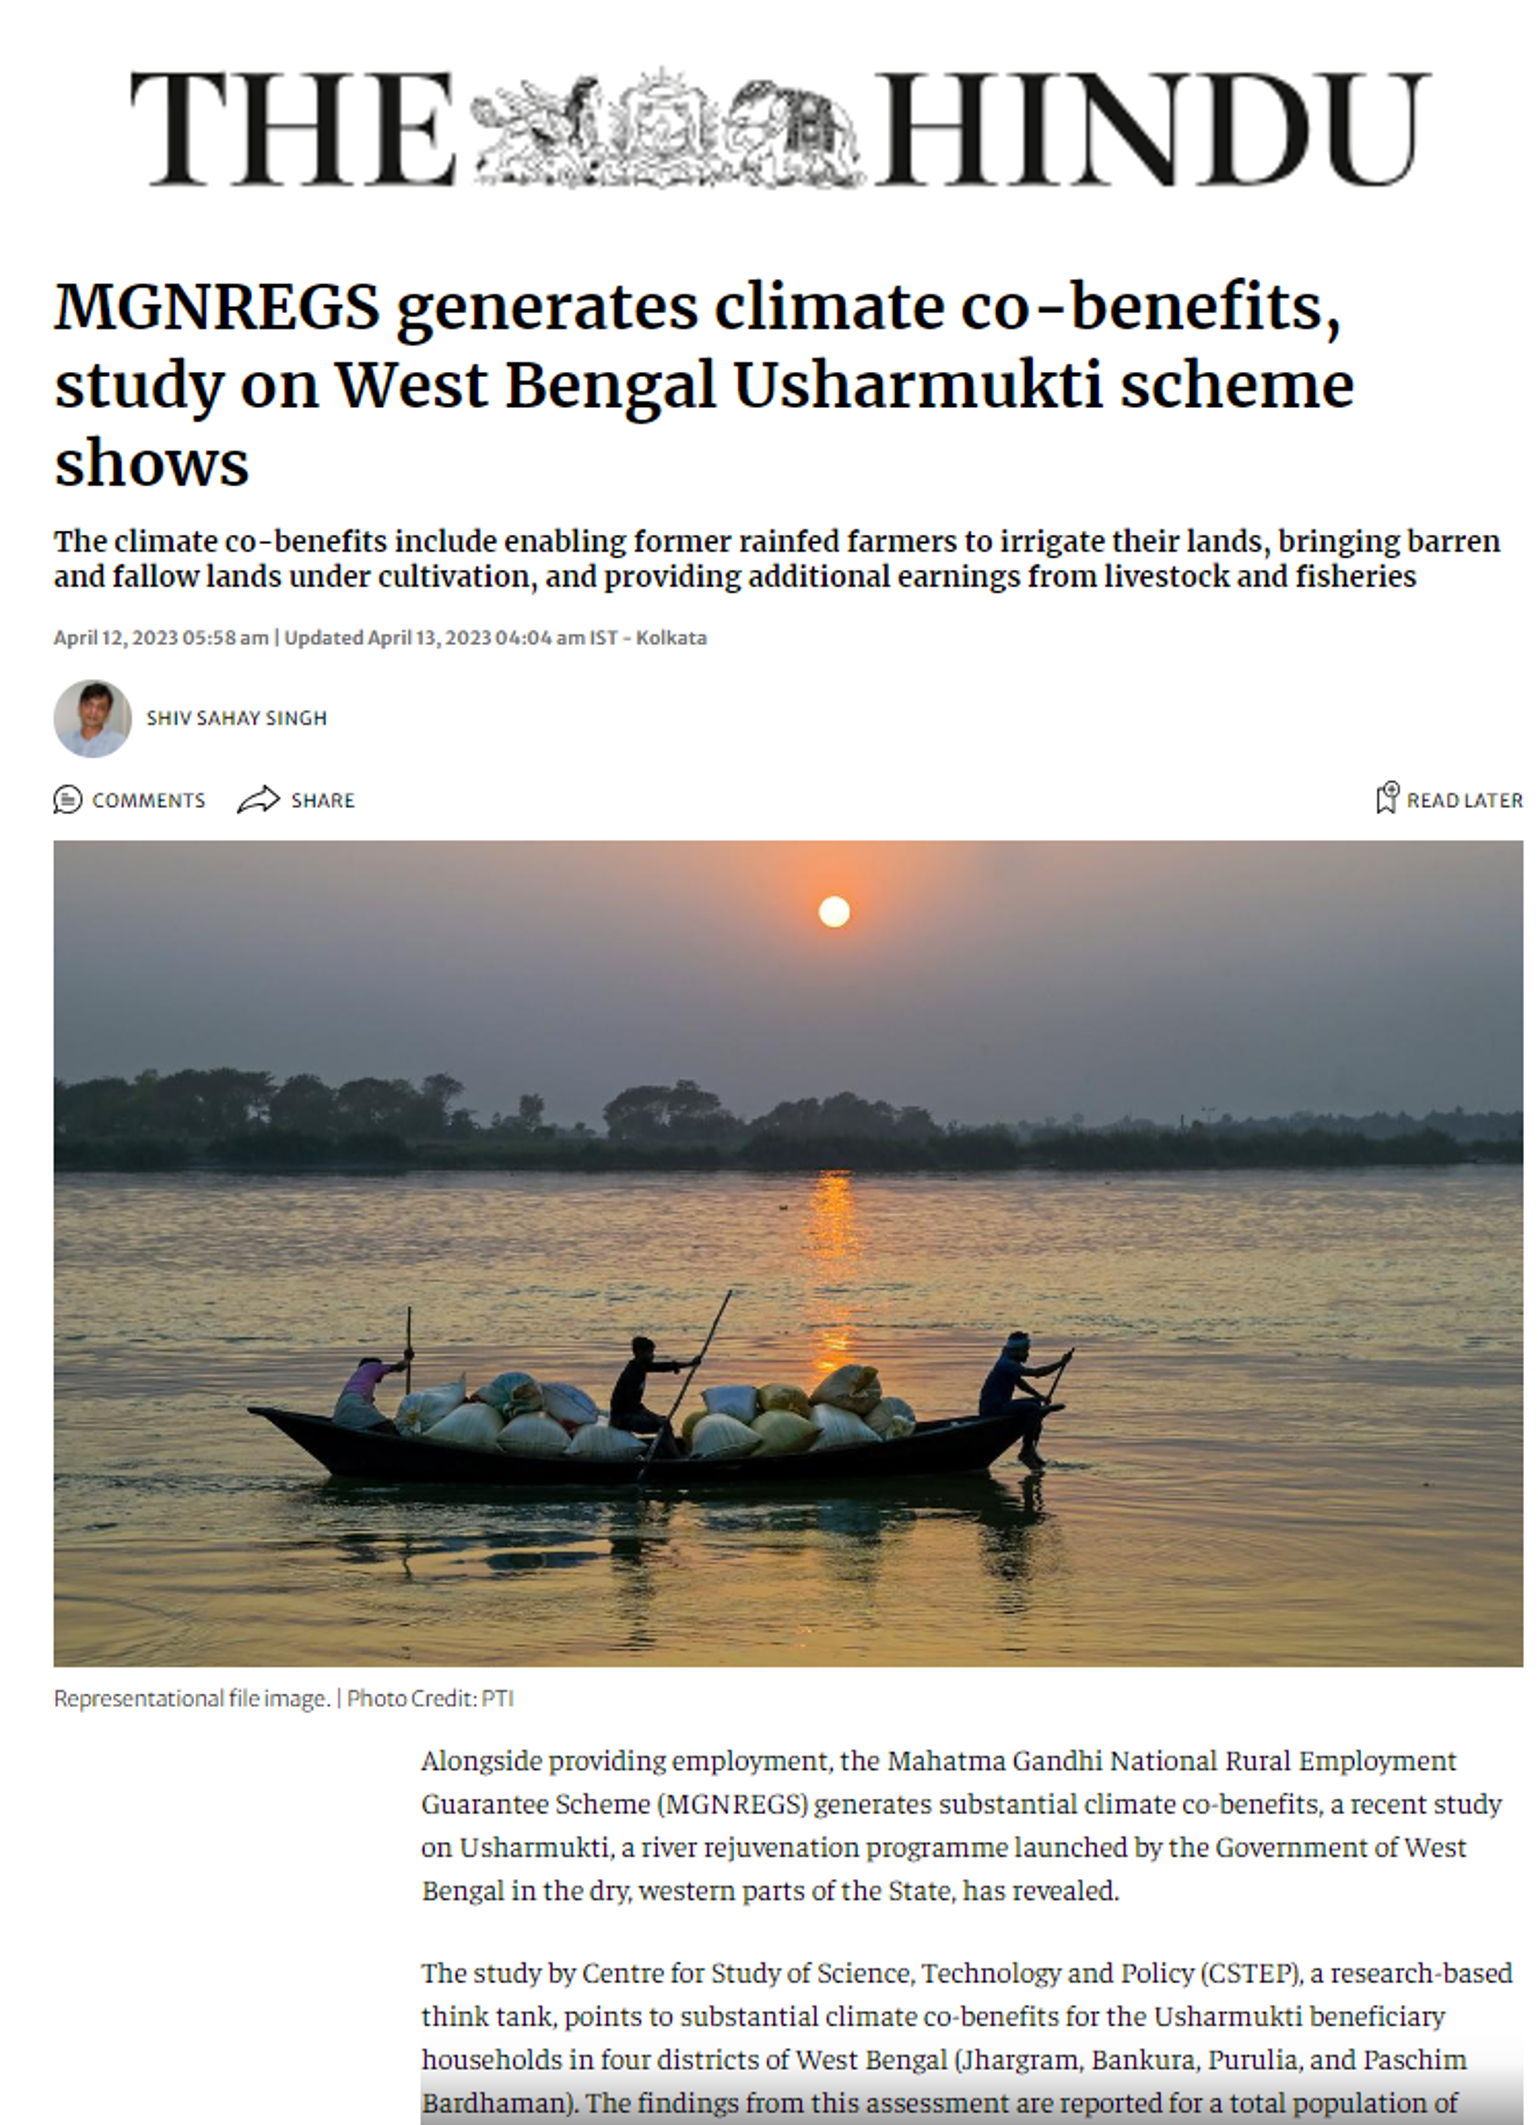 CSTEP’s study mentioned in and Tashina Madappa quoted by The Hindu on the climate co-benefits of MGNREGS